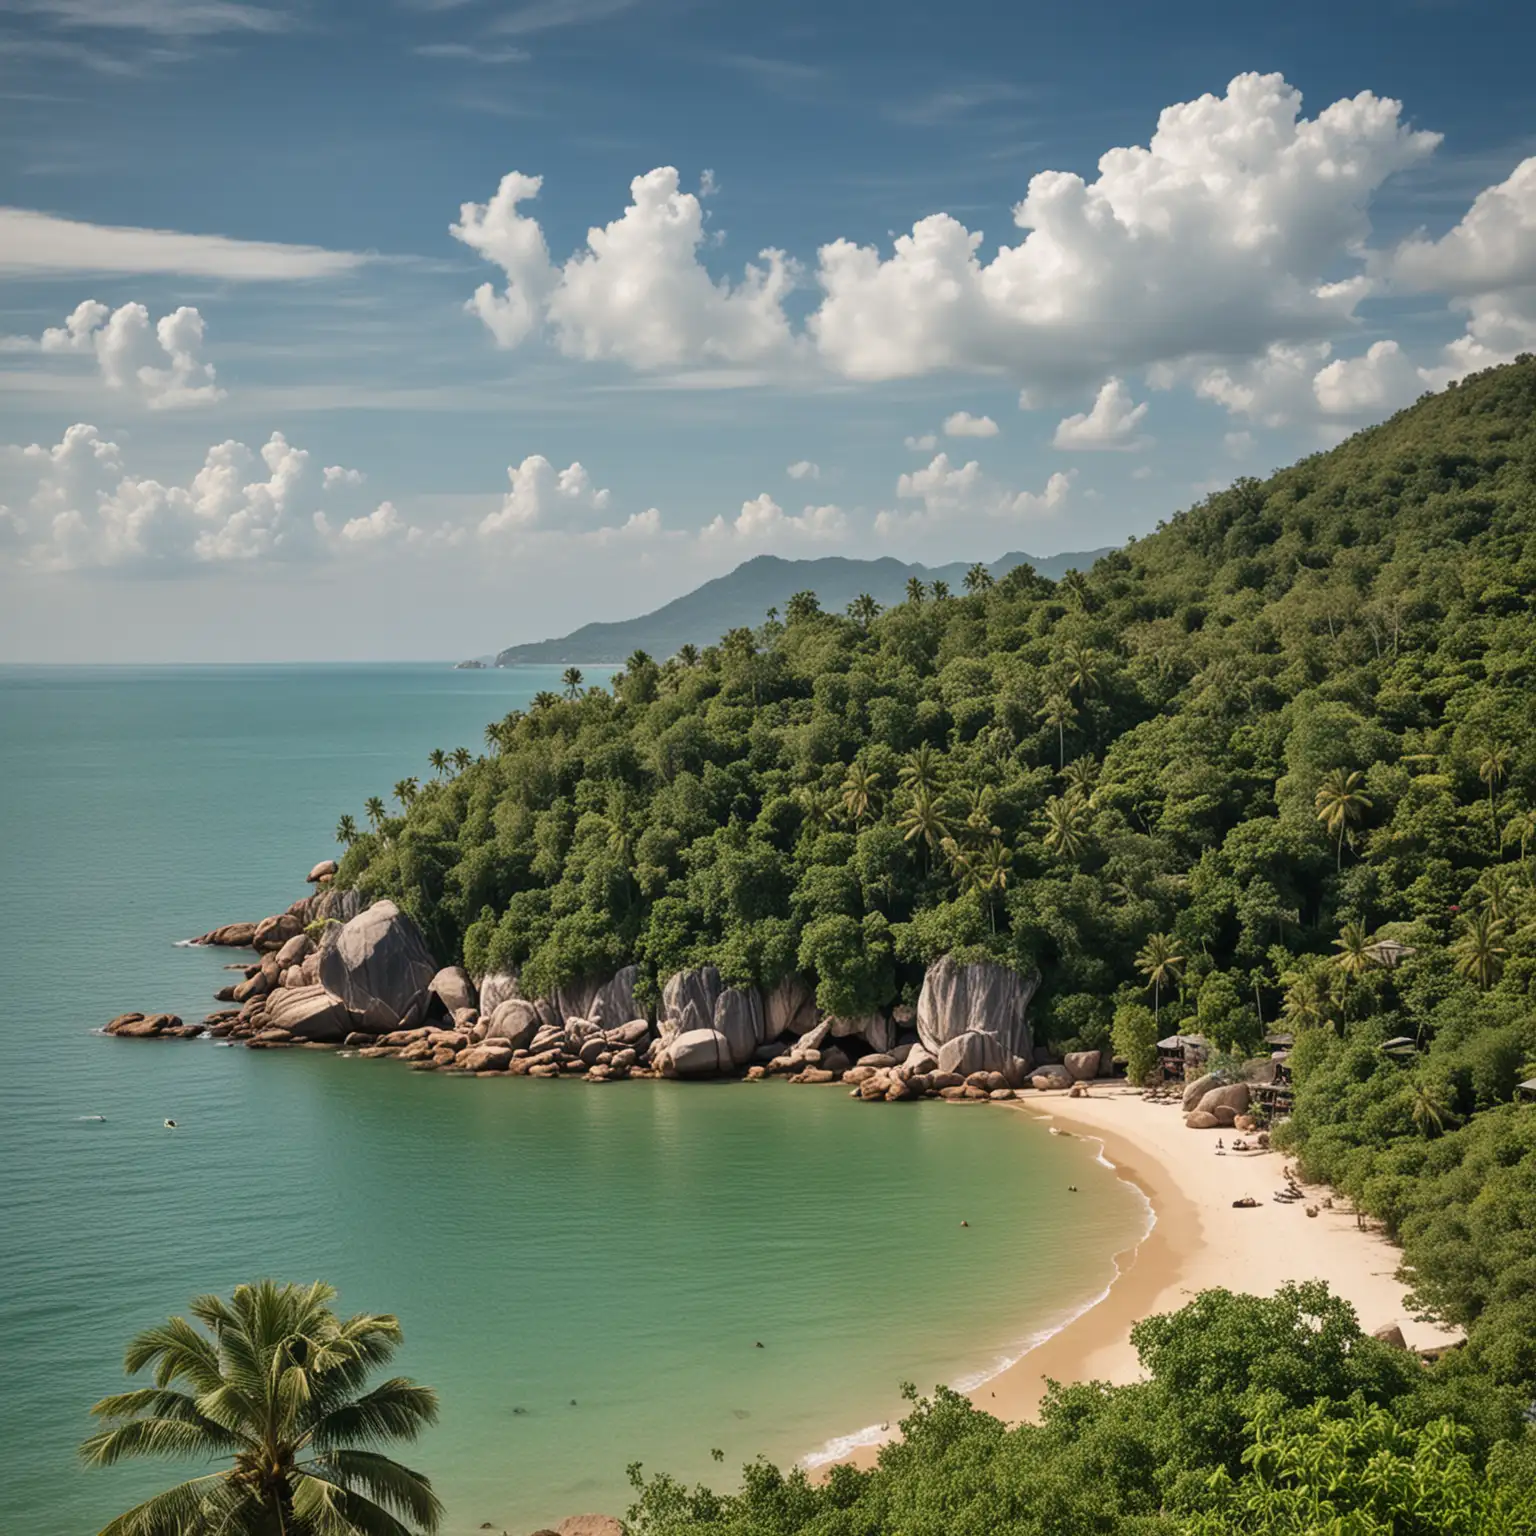 Kho Samui, Thailand characterized by lush greenery and tranquil surroundings